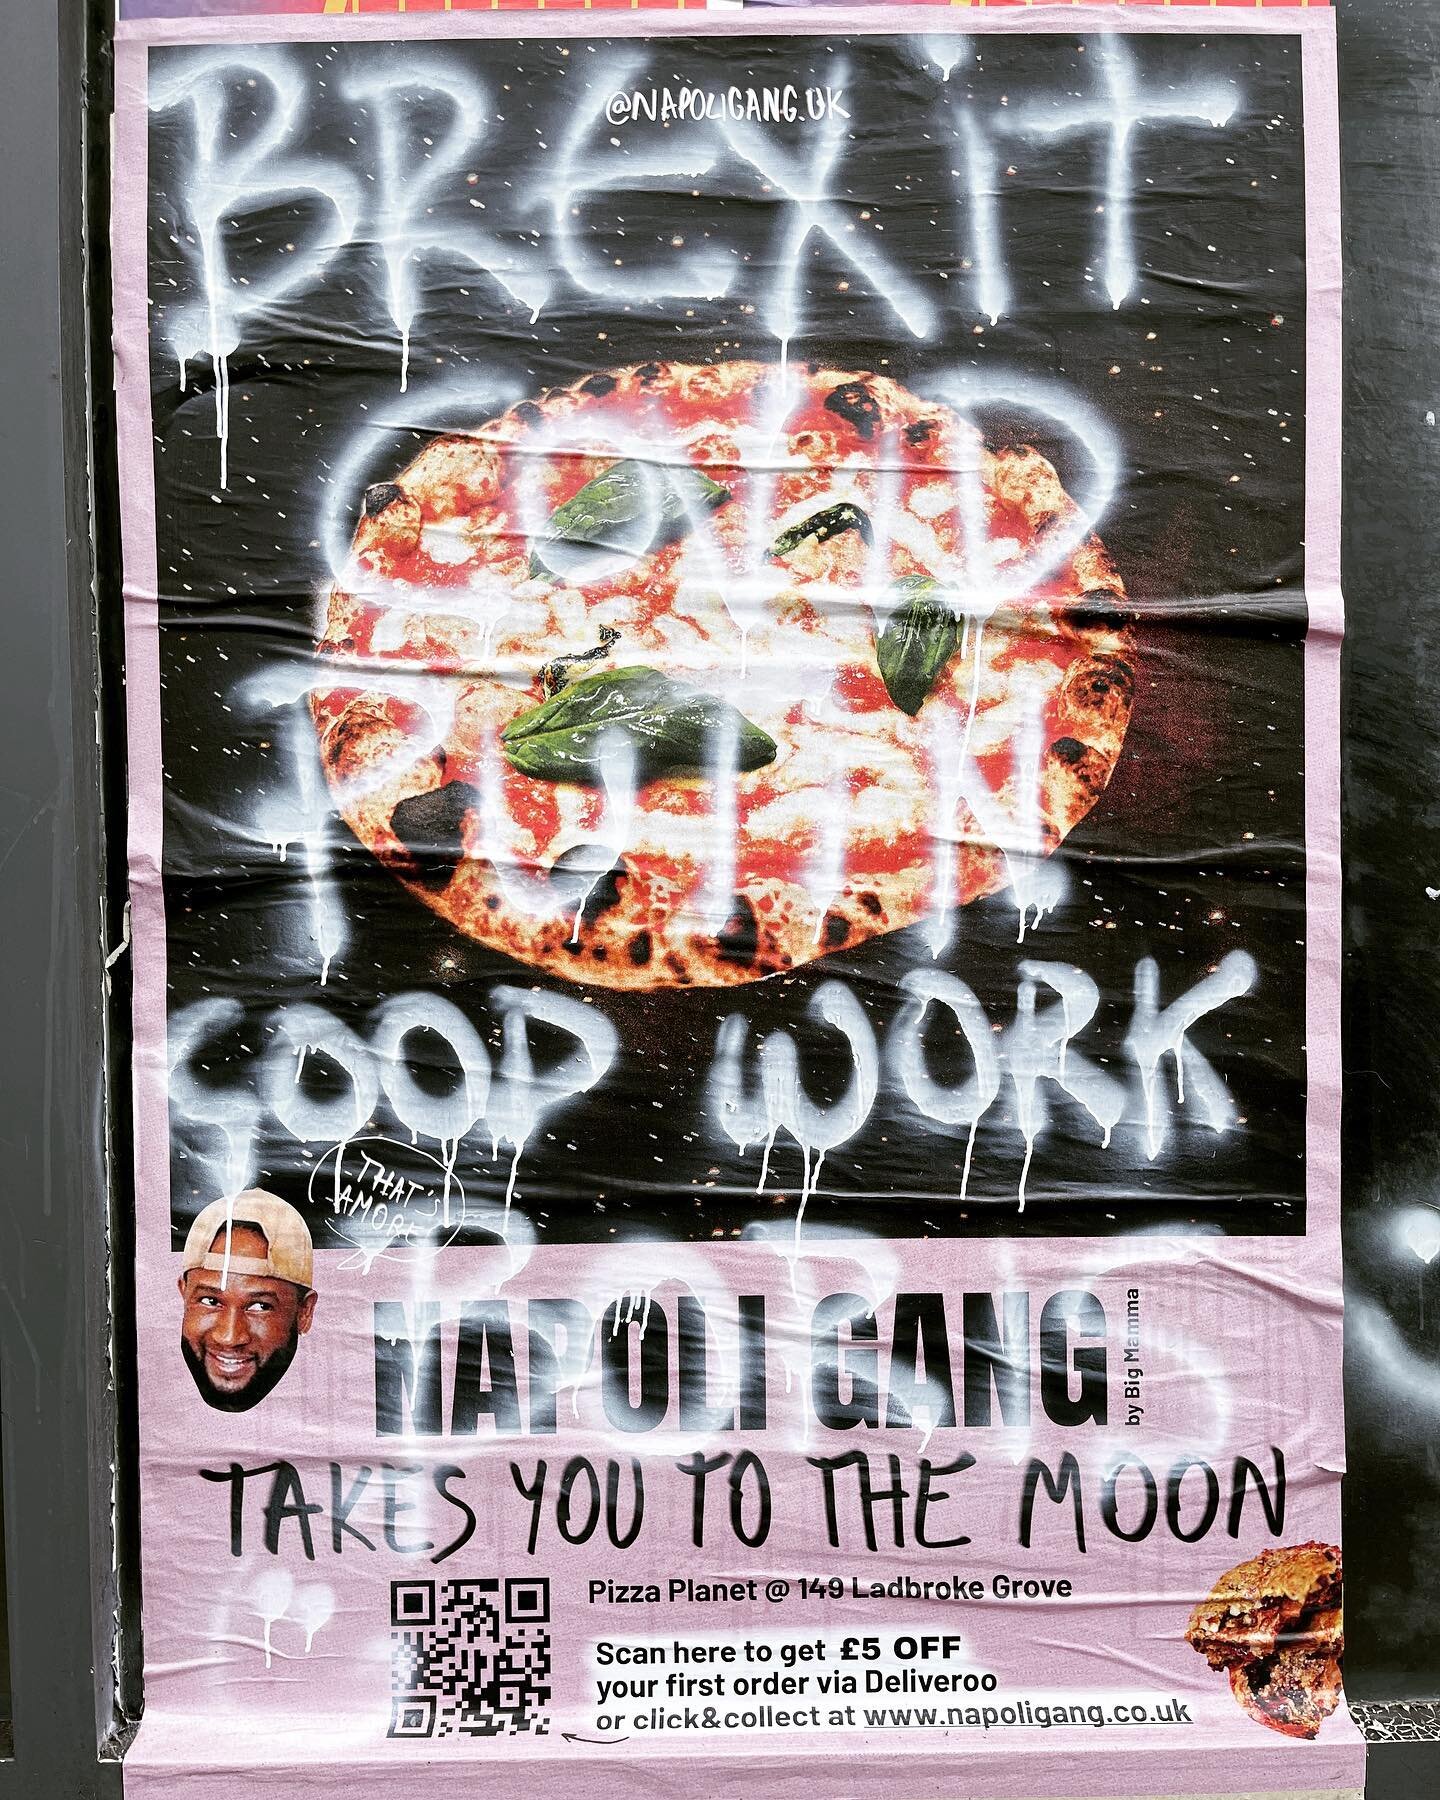 poster with graffiti on portobello road ..: brexit, covid, putin, good work boris - and that&rsquo;s all on a pizza 😂 made my day